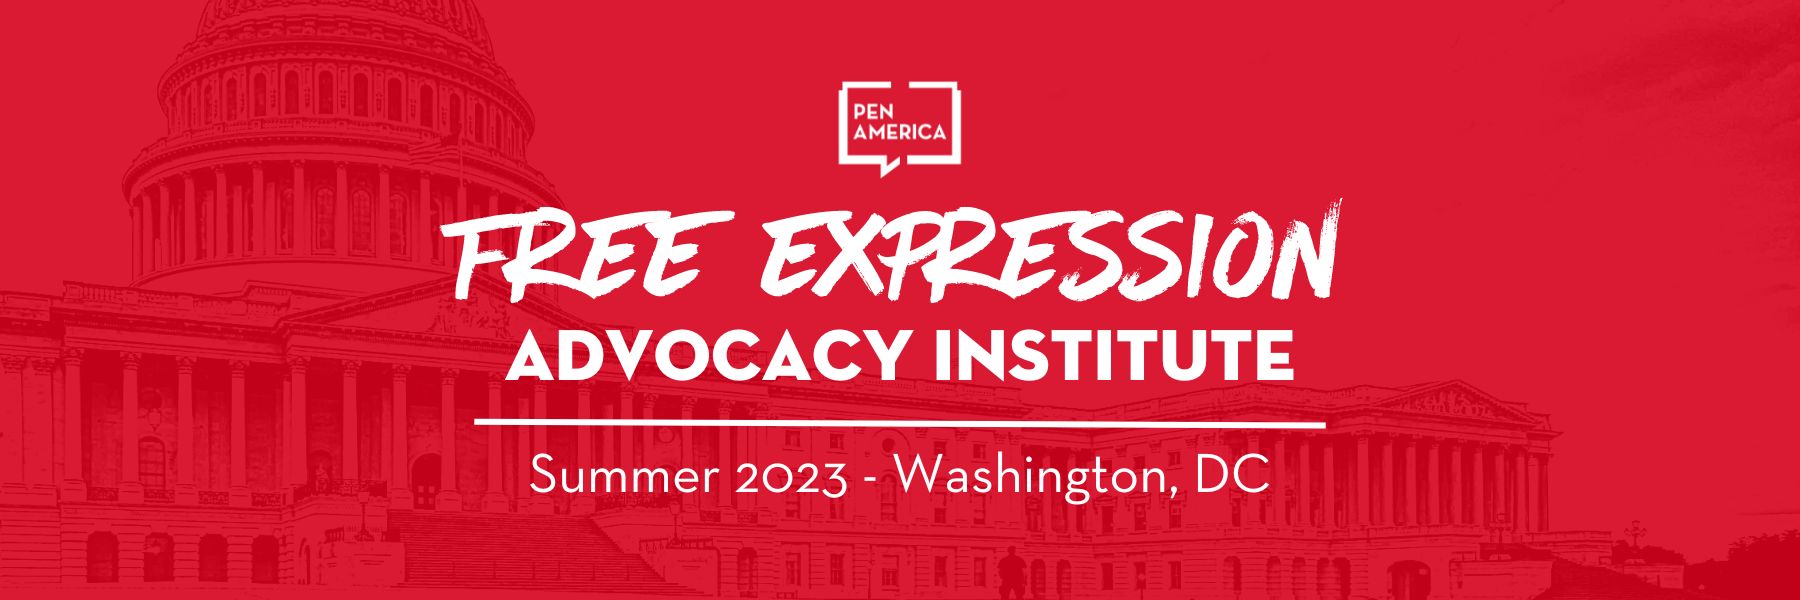 Free Expression Advocacy Institute Summer 2023 DC